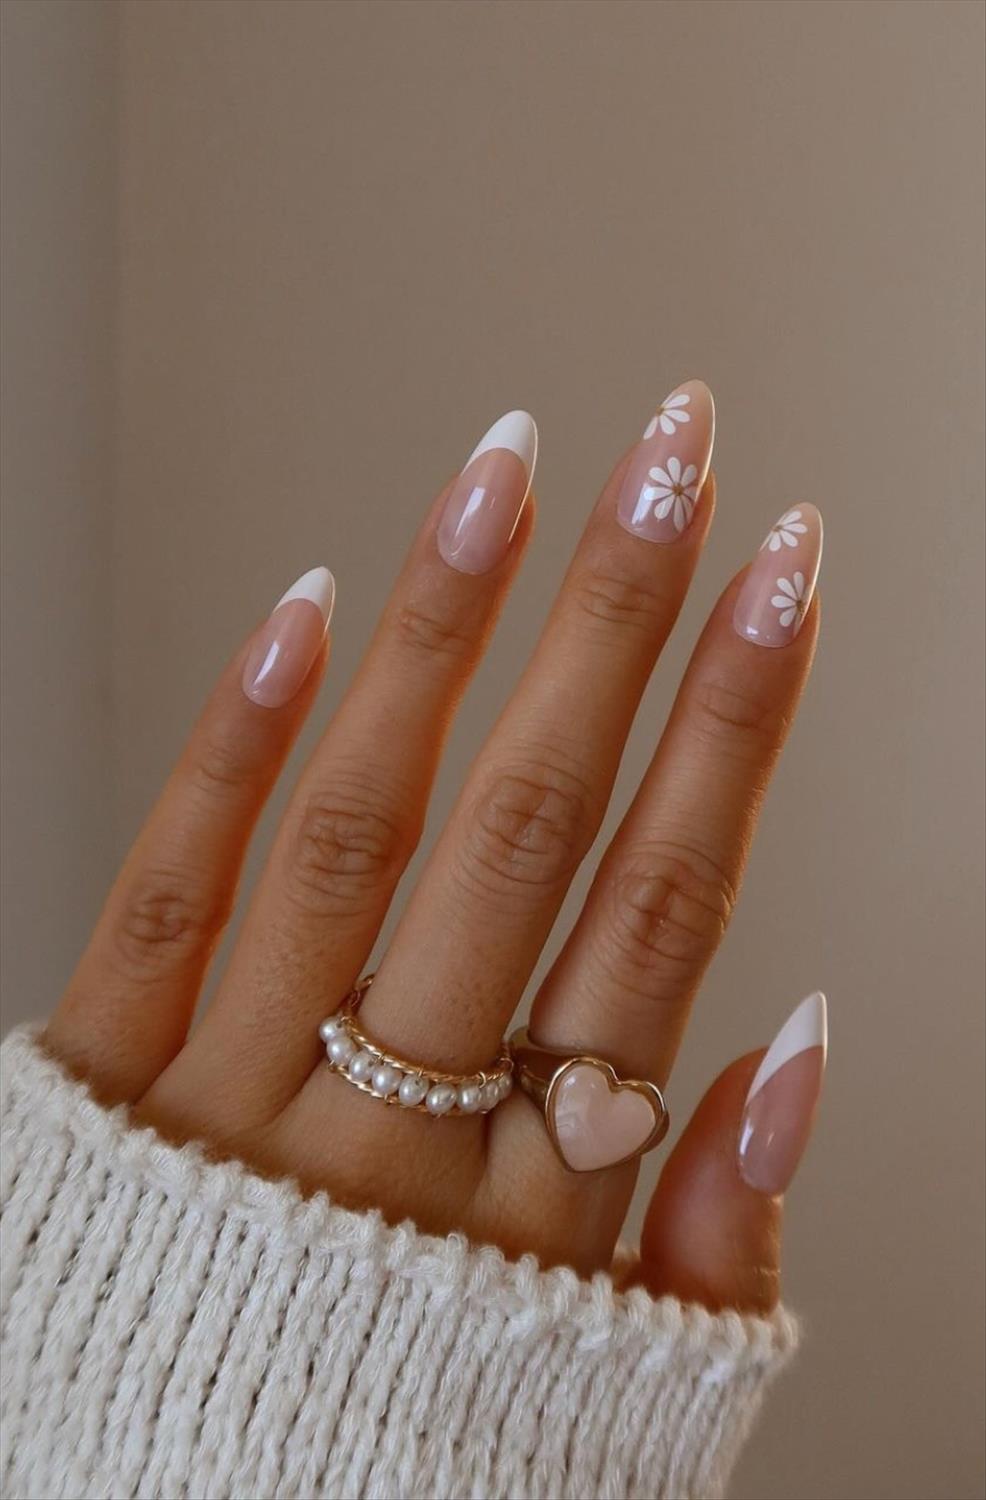 Best Short Winter Nails Design 2023 to Try